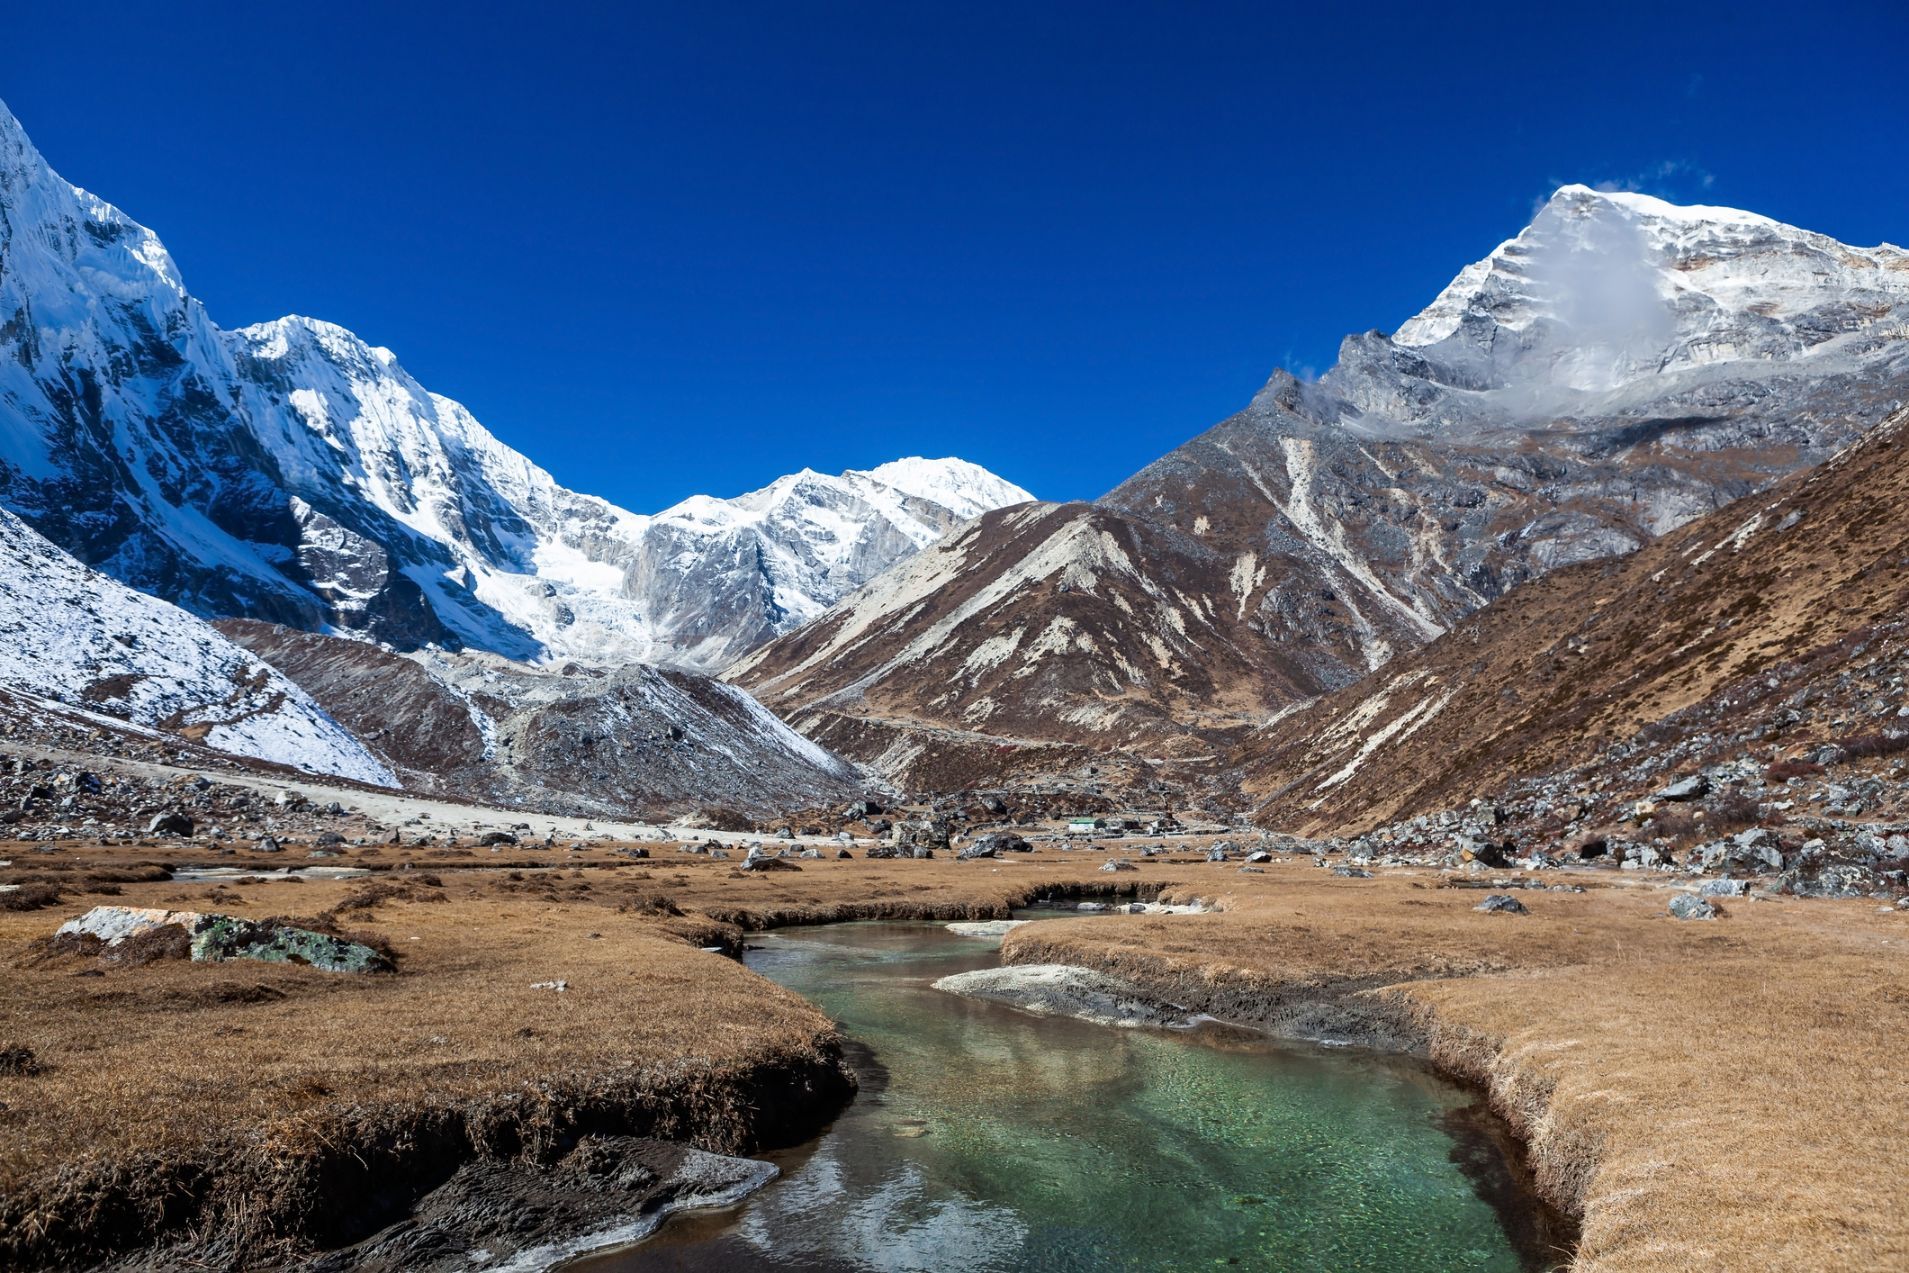 A beautiful Himalayan valley on the way to Tashi Lapcha pass. Taken in Khumbe valley on the Everest Base Camp line. Photo: Getty